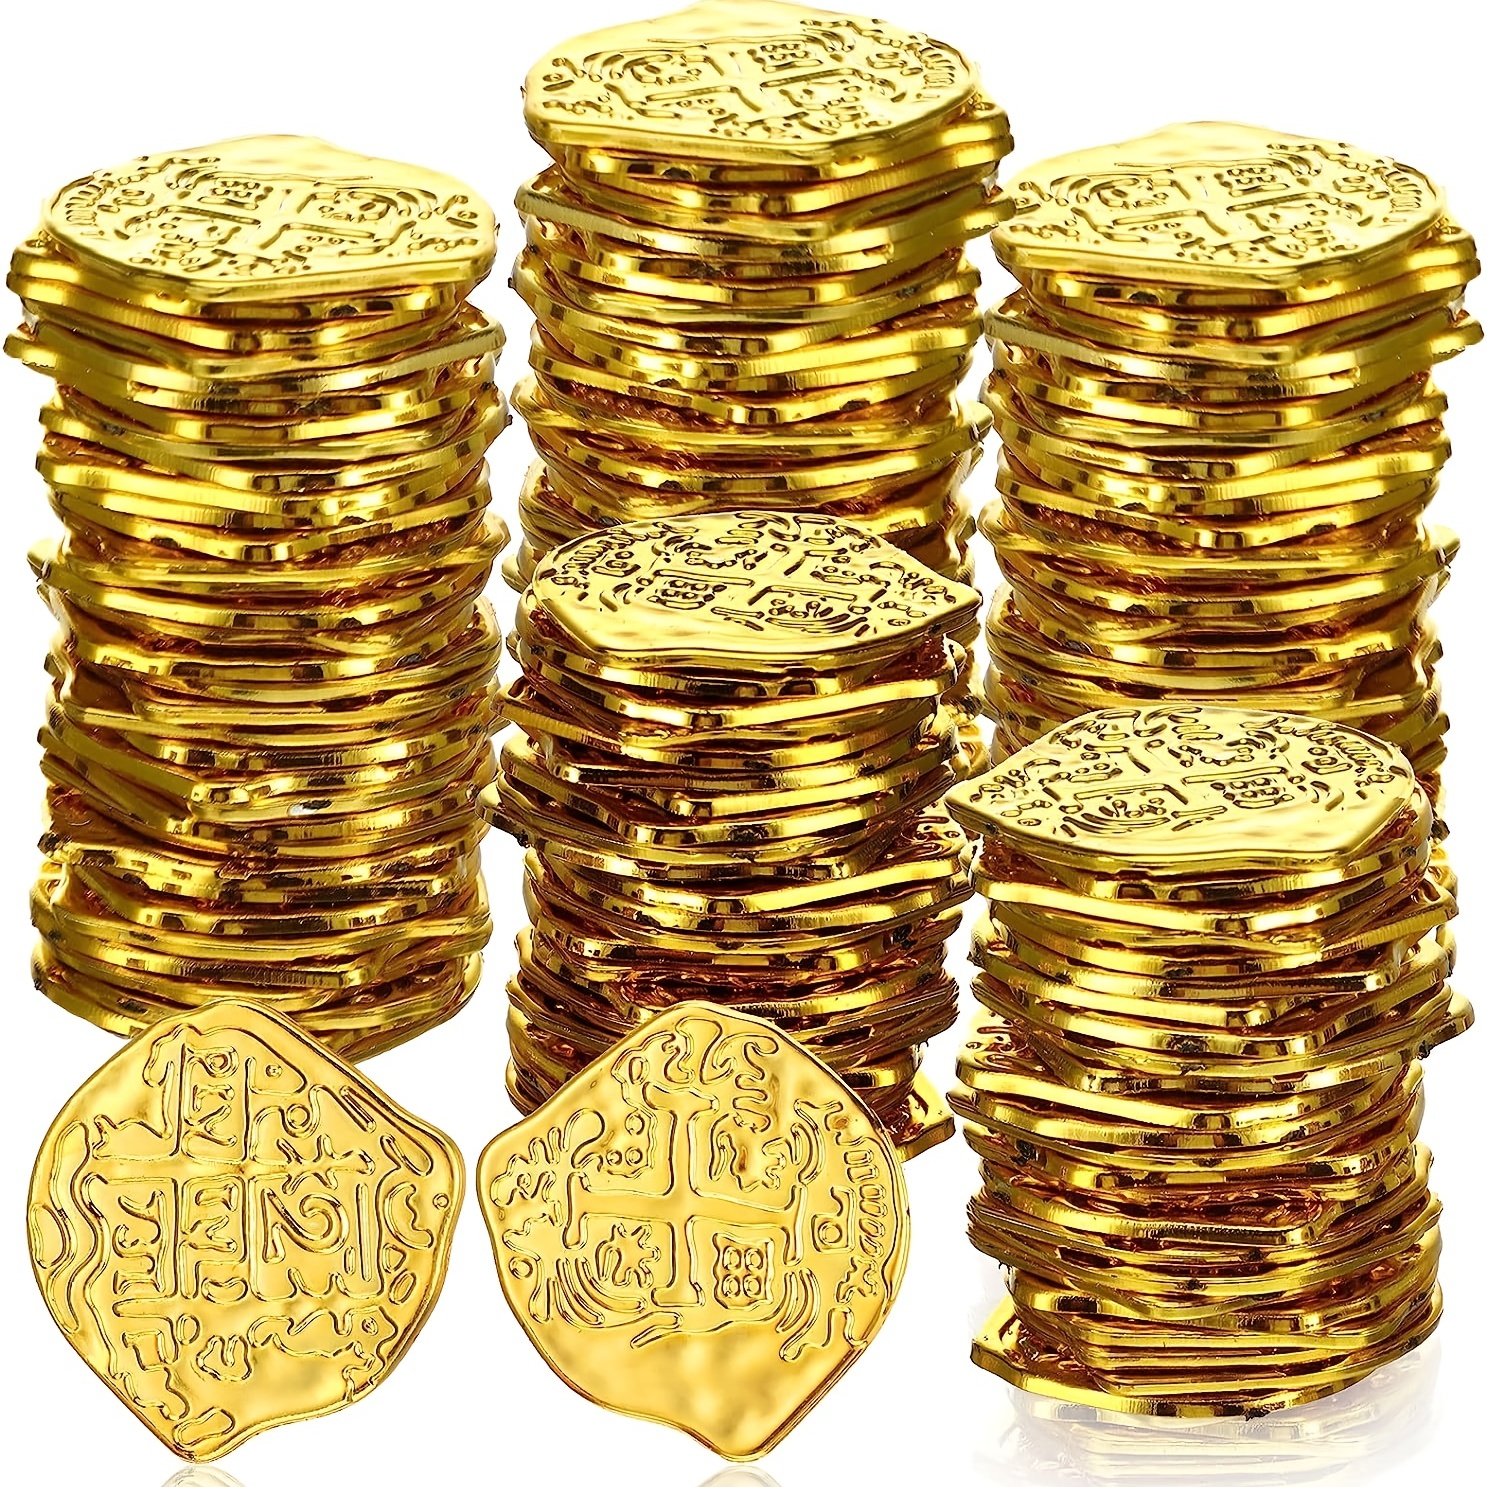 600 Pcs Pirate Gold Coins Plastic Treasure Coins Play Toy Coins Fake St.  Patricks Coin for Pirate Party Favors Supplies Treasure Hunt Game Teachers